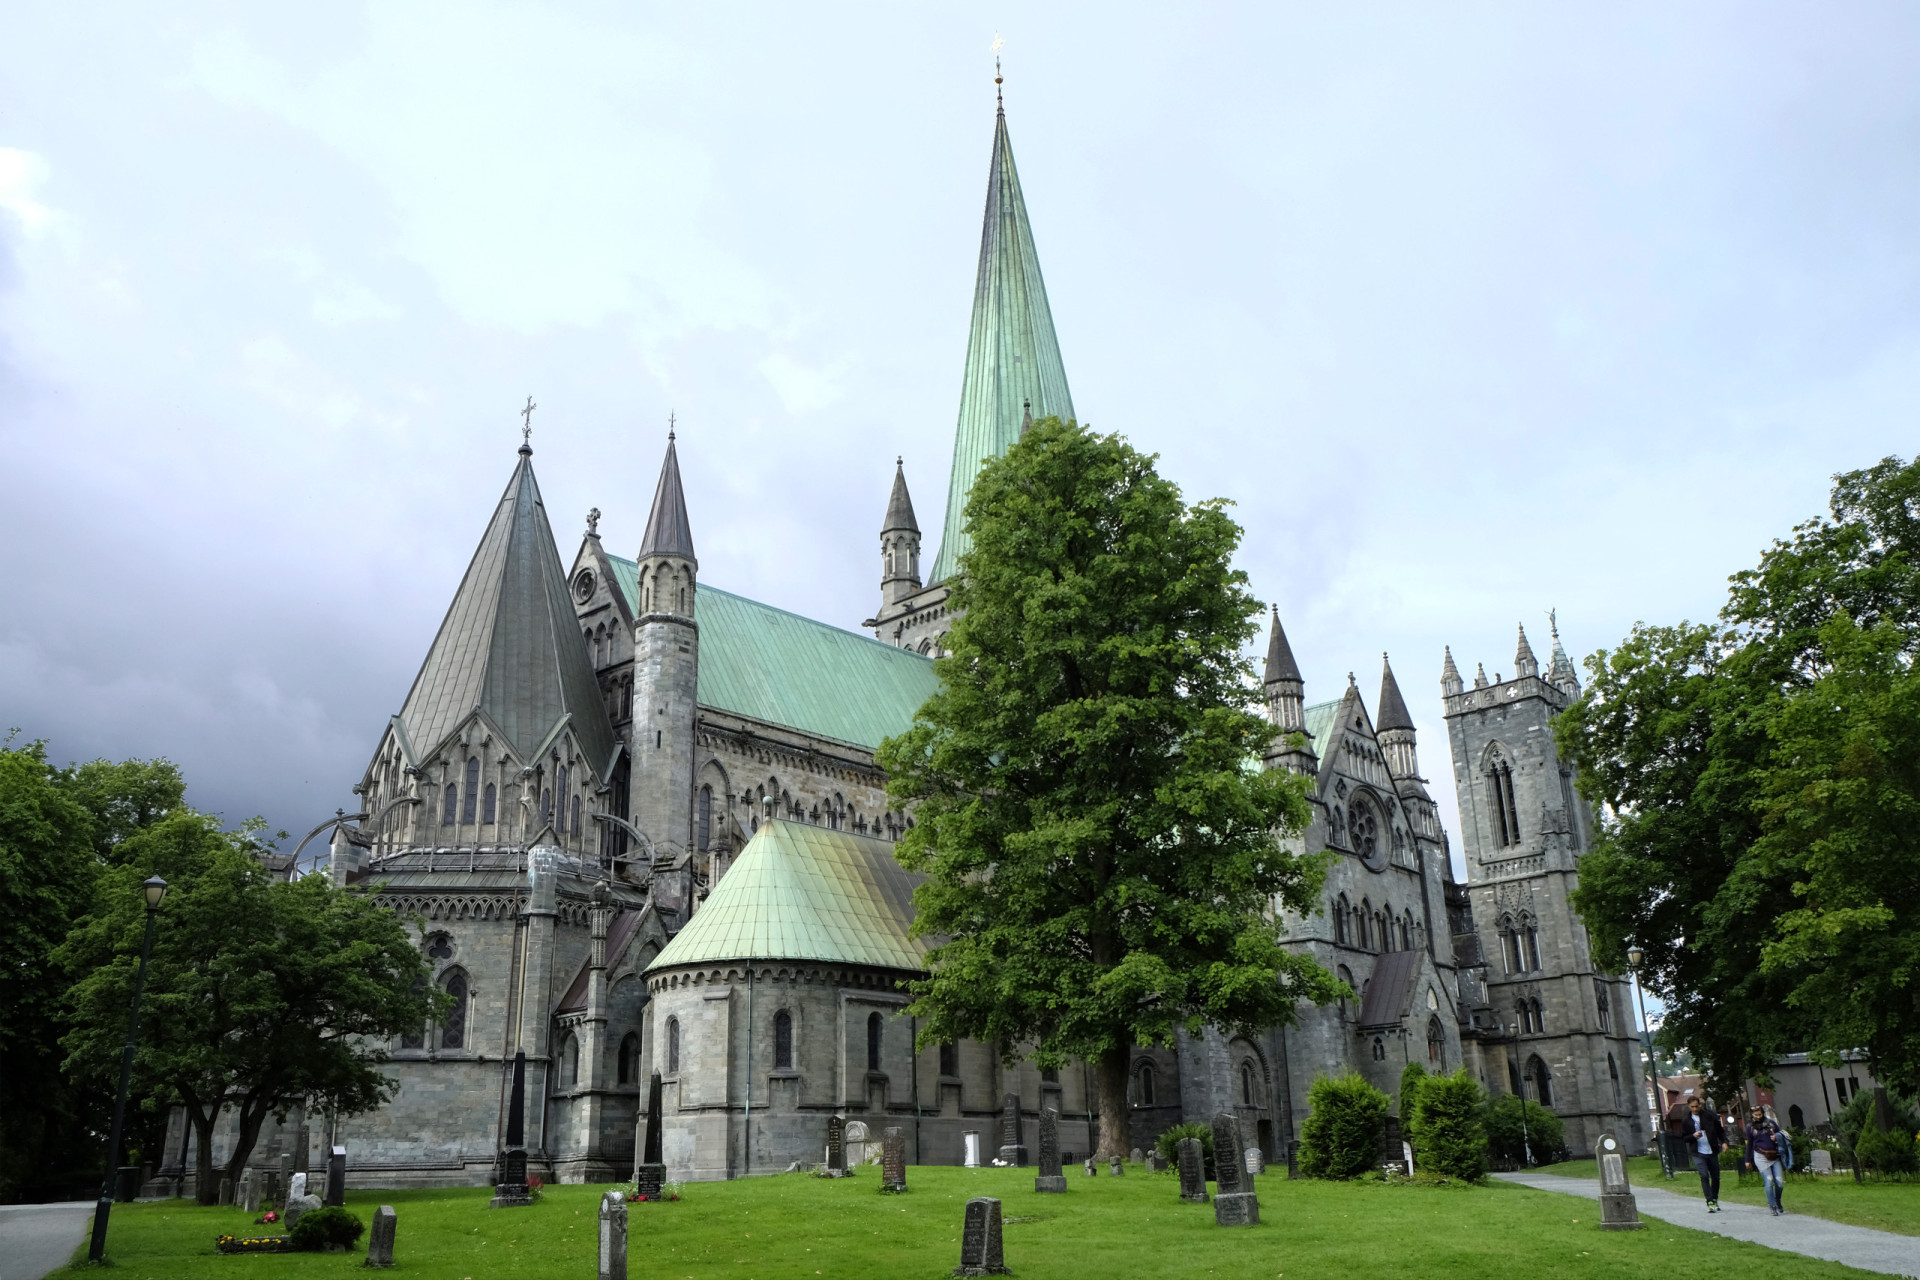 <p>Situated in the city of Trondheim, Nidaros Cathedral is the northernmost medieval cathedral in the world and the second largest in Scandinavia. The pilgrimage to Nidaros Cathedral is known as Saint Olav’s Way, and starts in Selånger, Sweden.</p><p><a href="https://www.msn.com/en-us/community/channel/vid-7xx8mnucu55yw63we9va2gwr7uihbxwc68fxqp25x6tg4ftibpra?cvid=94631541bc0f4f89bfd59158d696ad7e">Follow us and access great exclusive content every day</a></p>